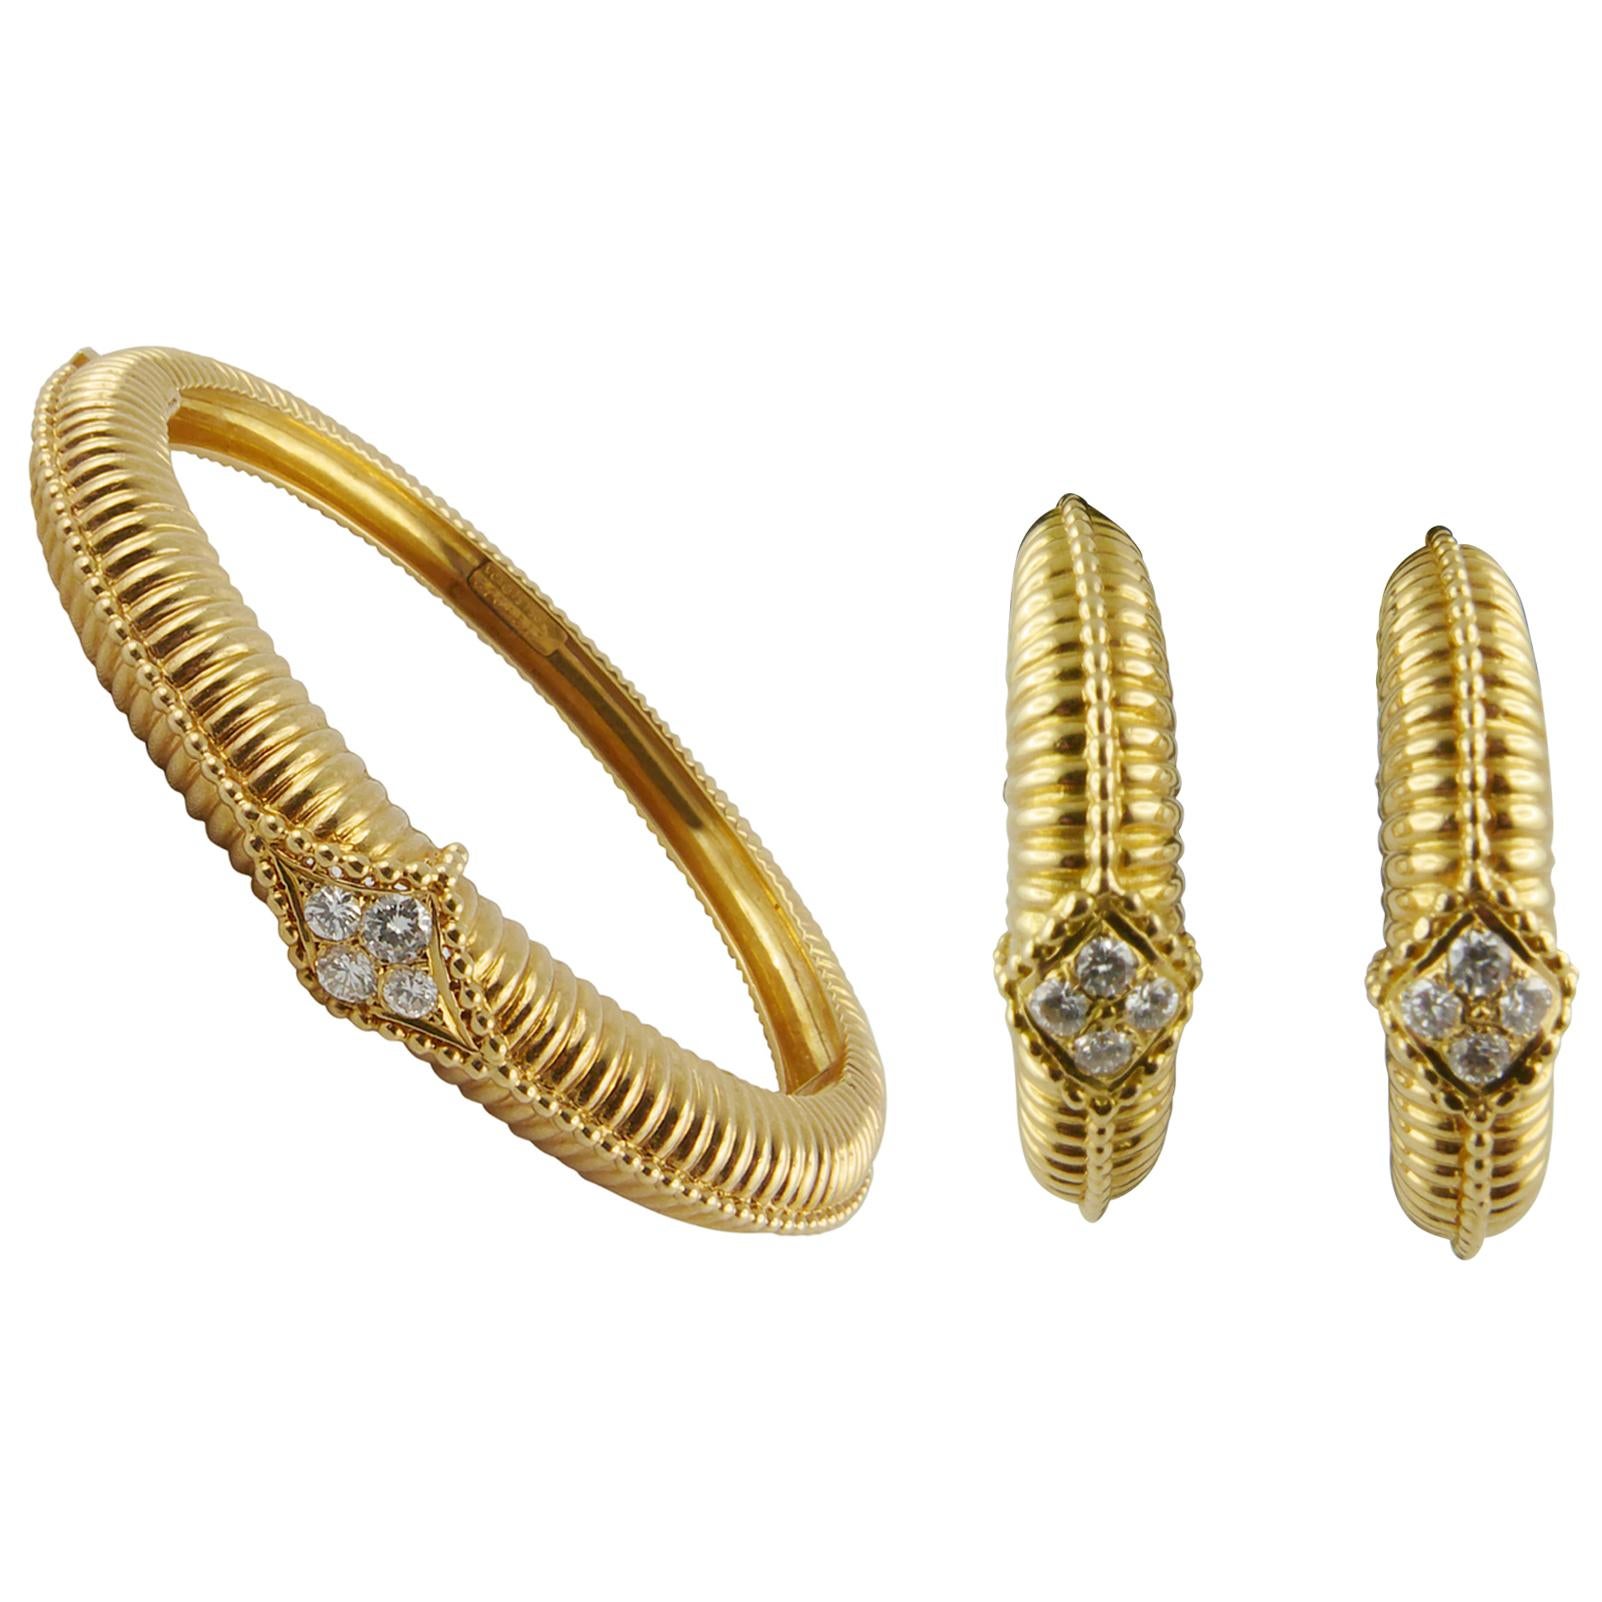 1970s Van Cleef & Arpels Yellow Gold and Diamonds Bracelet and Earrings Set